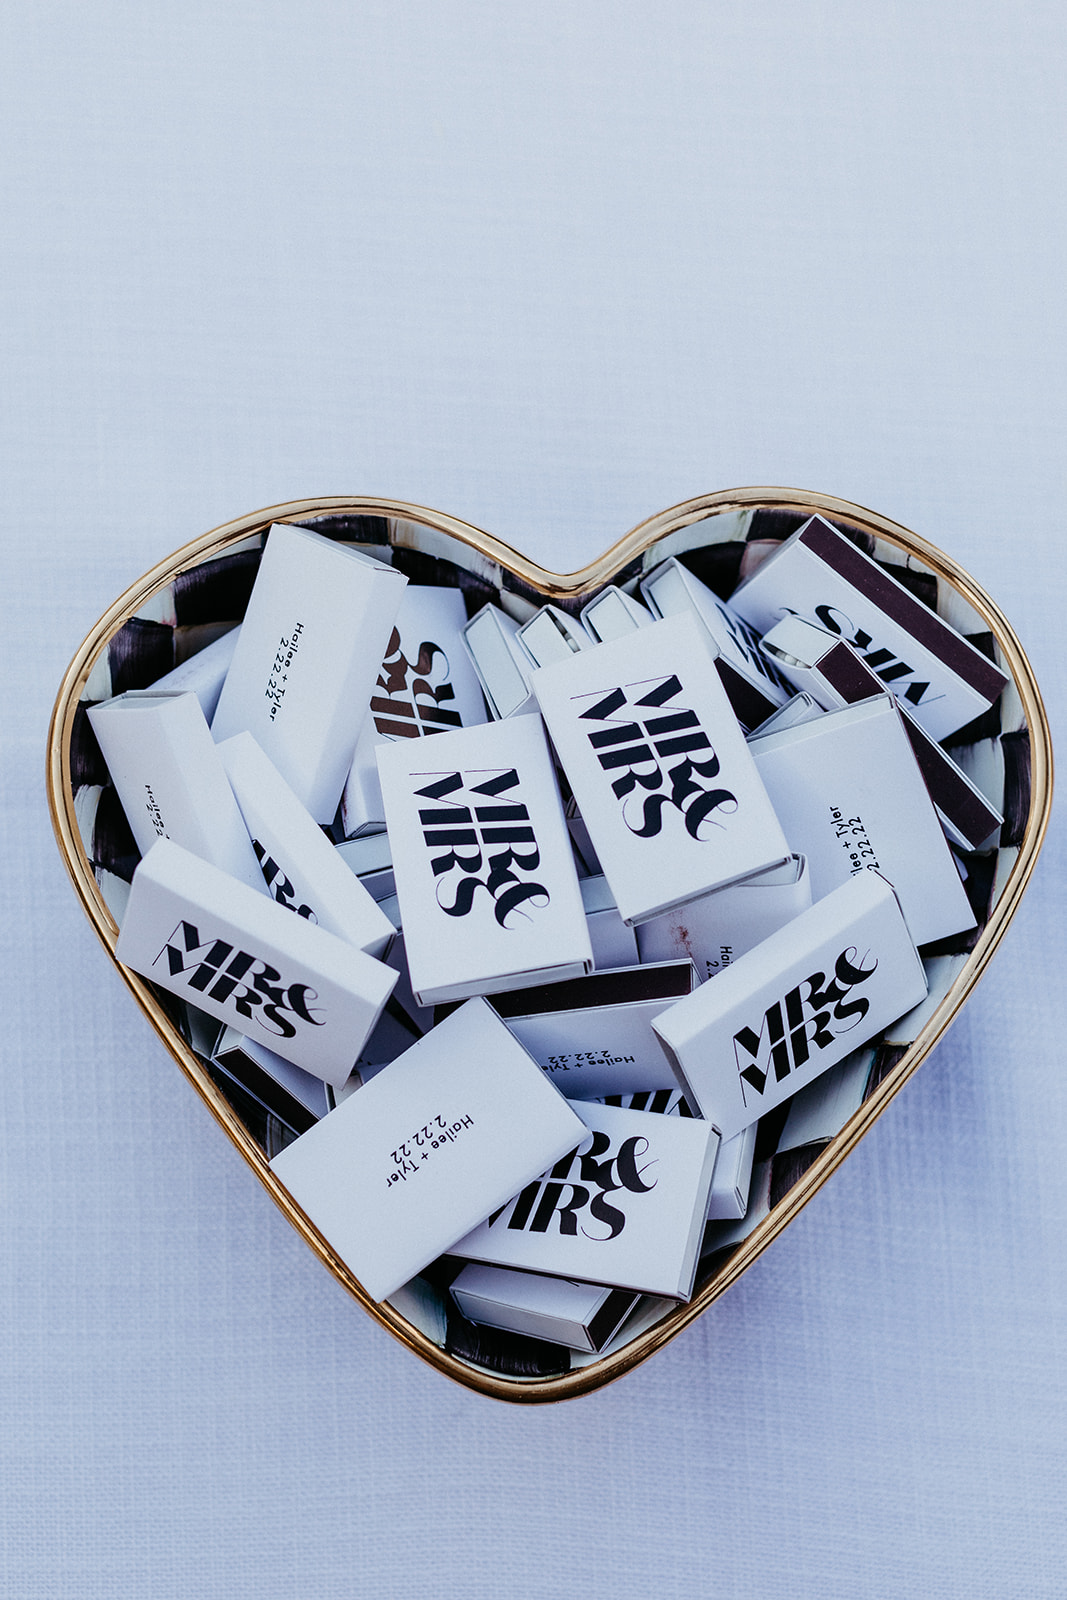 Mr. & Mrs. Matchstick Packets in Heart Shaped Bowl for Wedding Reception Favors 